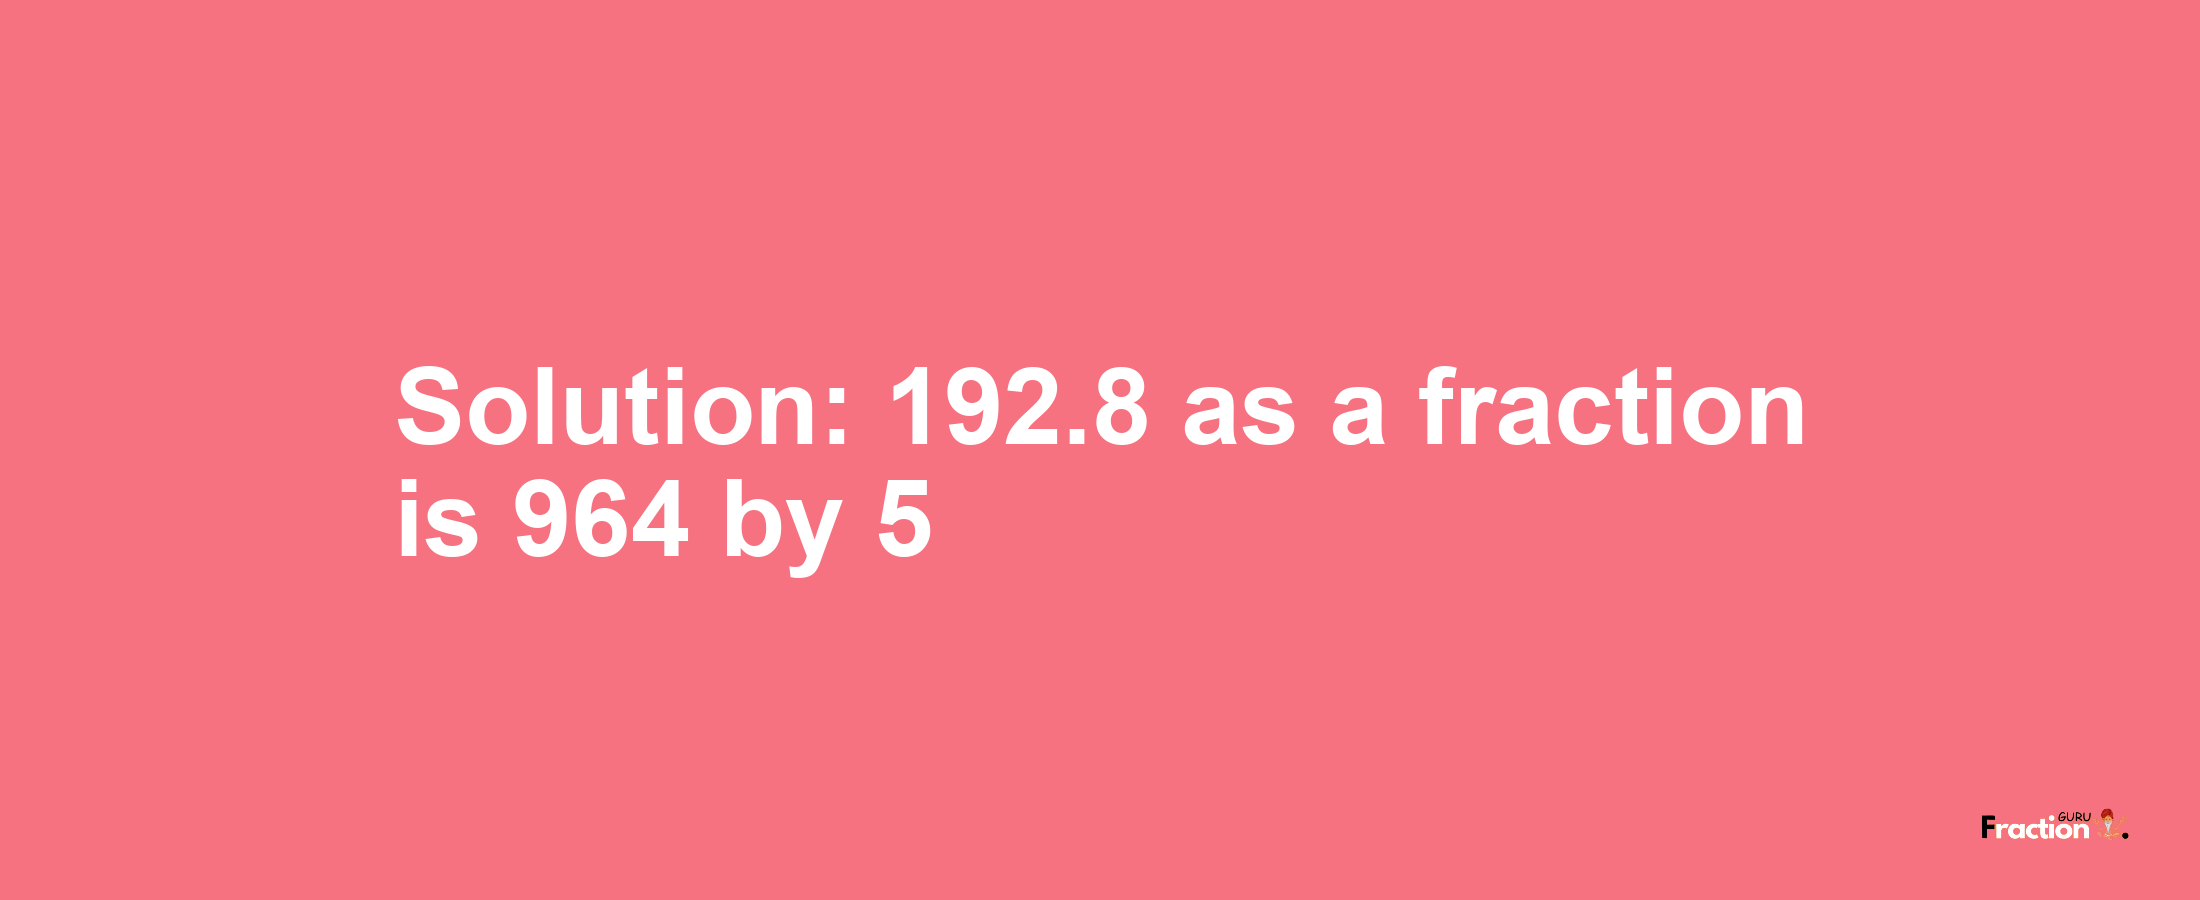 Solution:192.8 as a fraction is 964/5